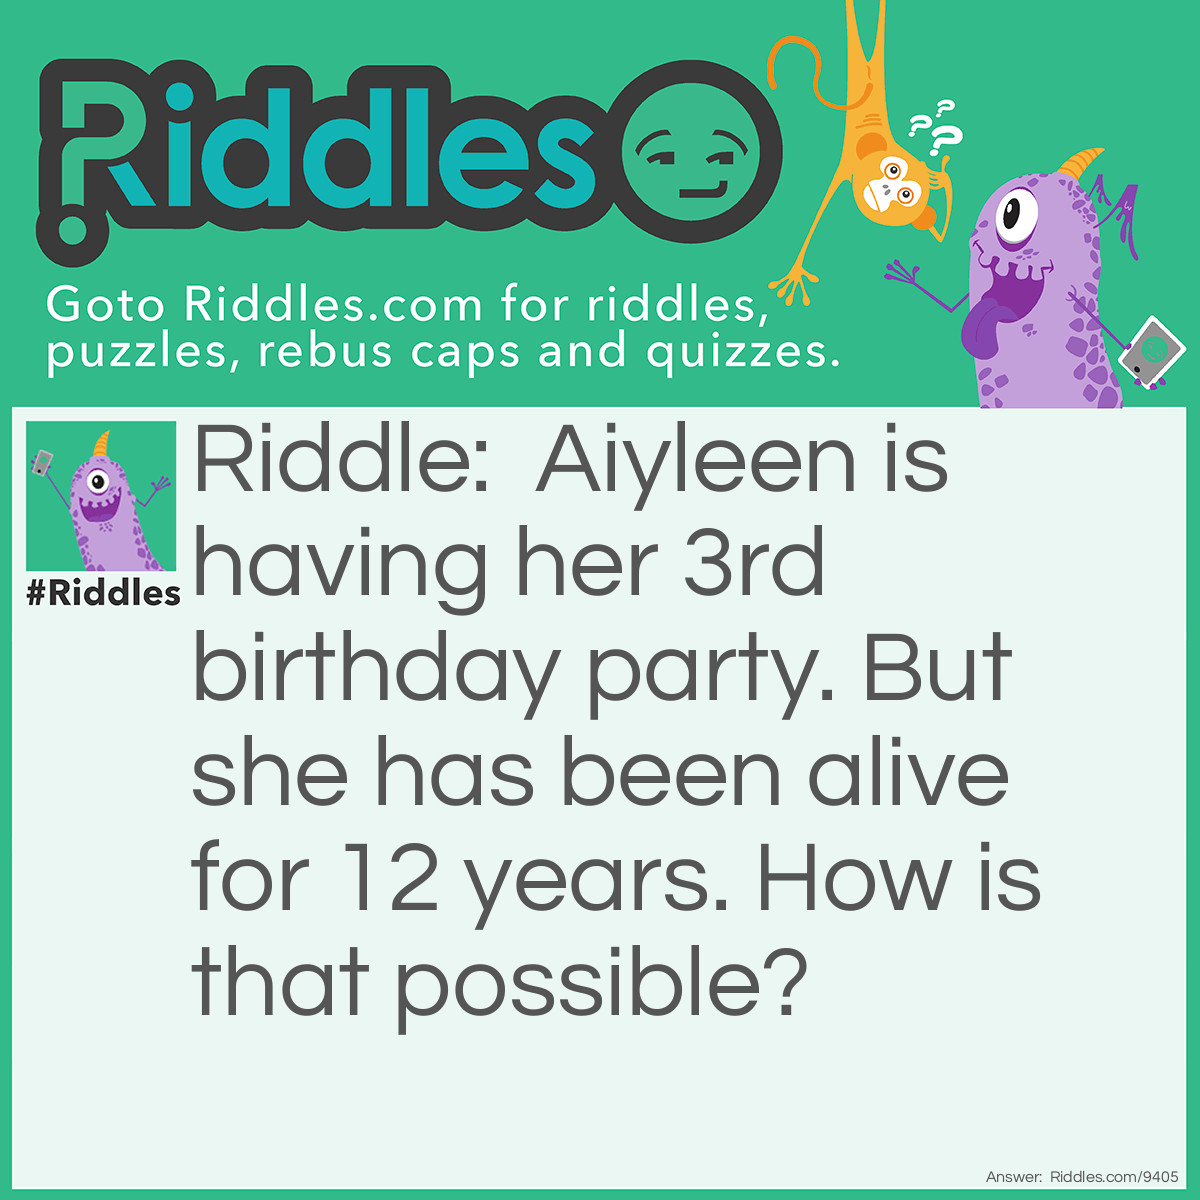 Riddle: Aiyleen is having her 3rd birthday party. But she has been alive for 12 years. How is that possible? Answer: Her birthday is on a leap year! (February 29th)